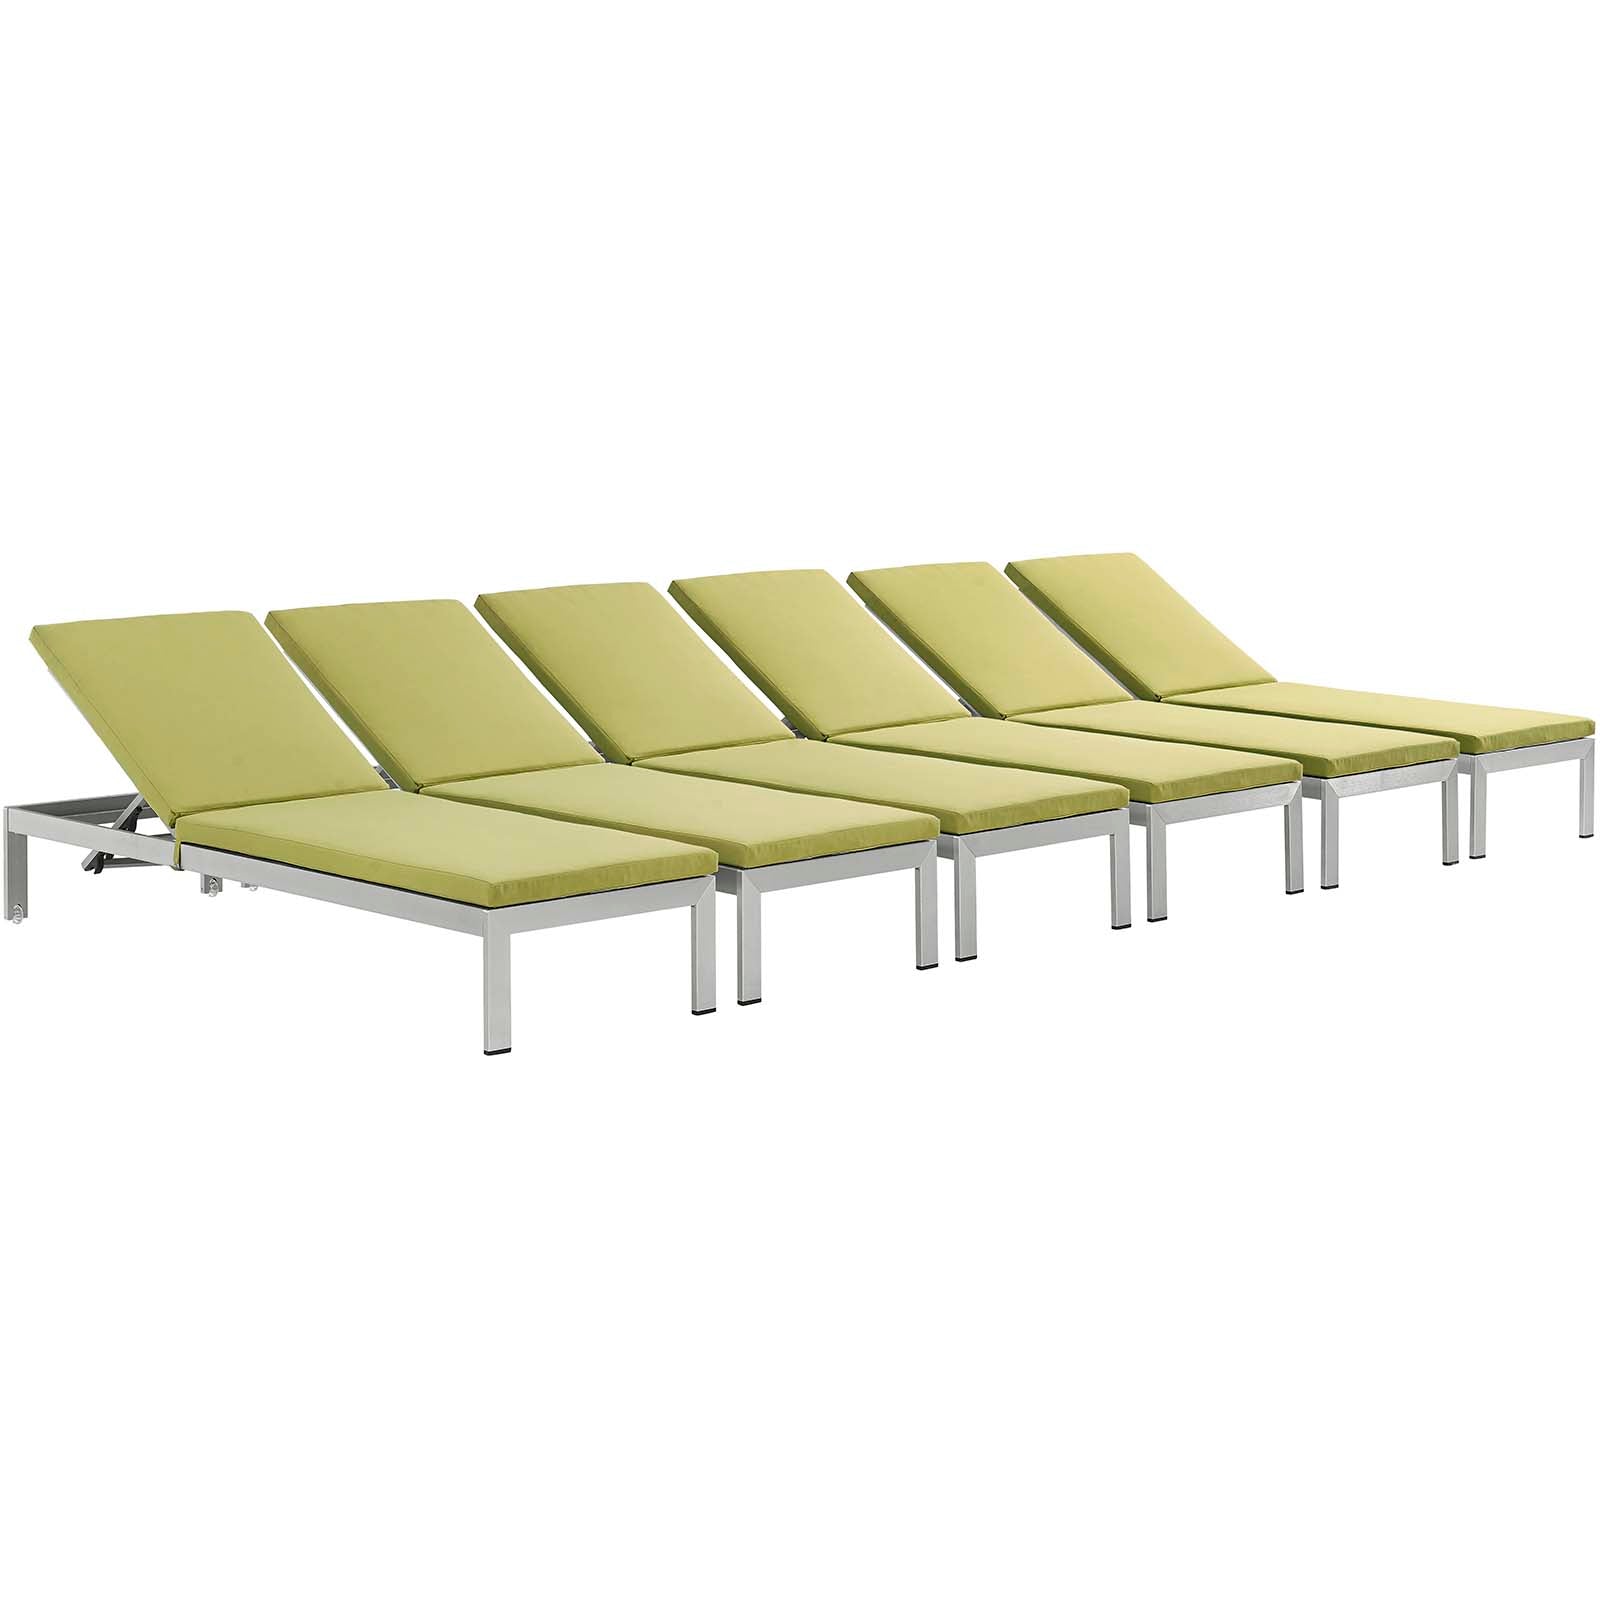 Modway Outdoor Loungers - Shore Chaise with Cushions Outdoor Patio Aluminum Set of 6 Silver Peridot